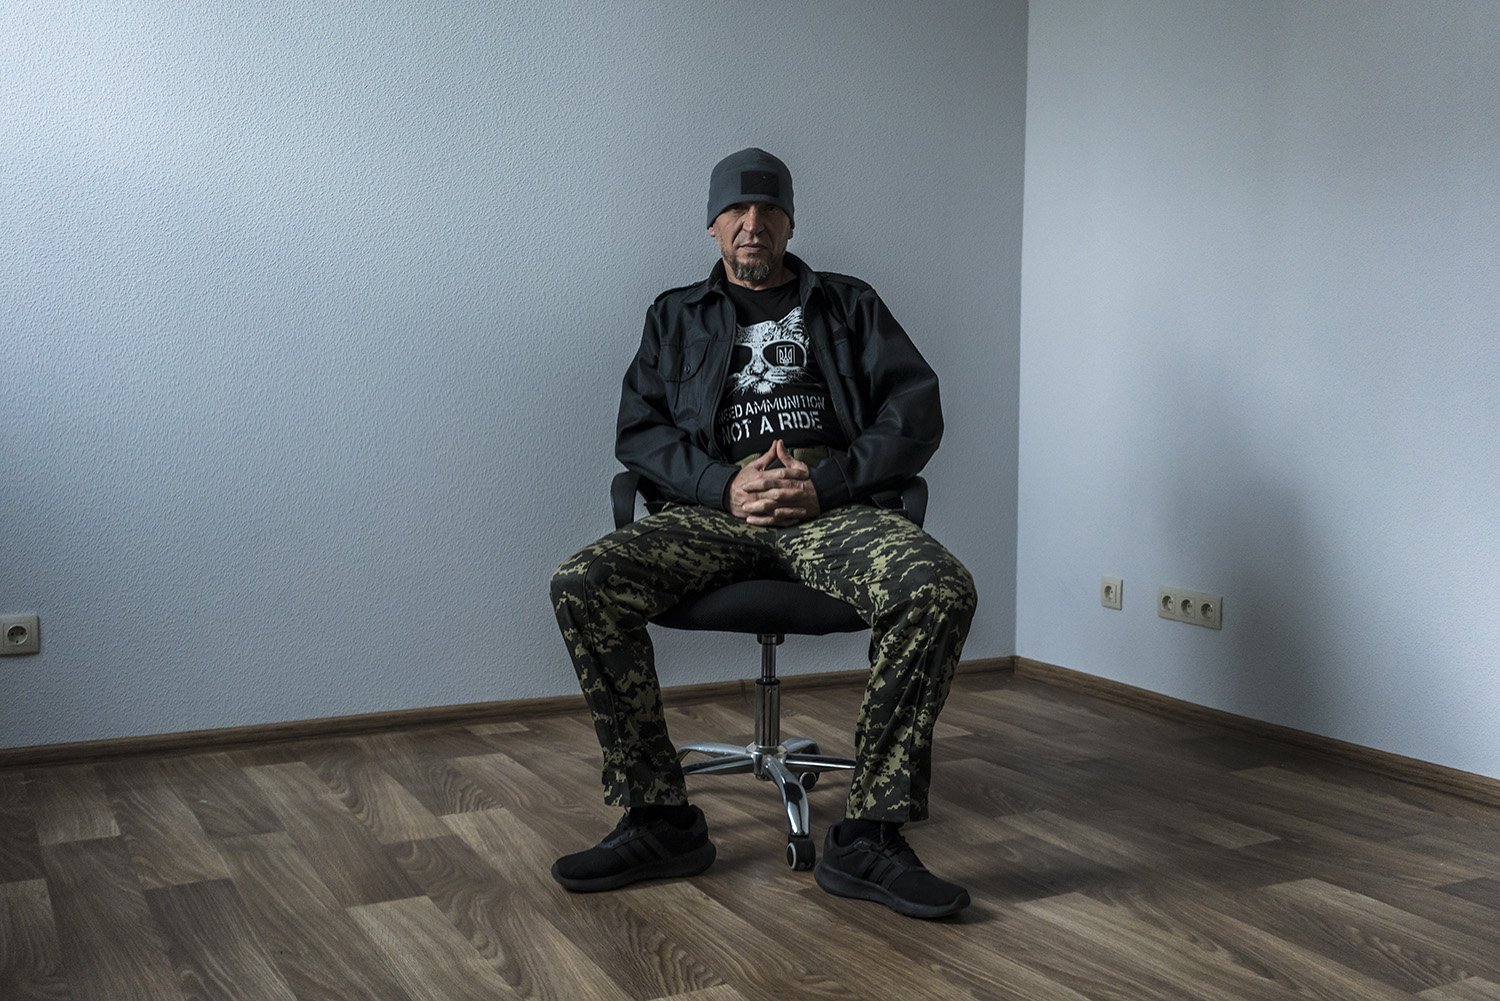  Yevgeny Nuzhen, 55, a Russian prisoner of war held by Ukraine, poses for a portrait on Saturday, October 29, 2022 in Kyiv, Ukraine. Nuzhen was a prisoner in Russia when he was offered the opportunity to join the Wagner Group, a Russian private milit